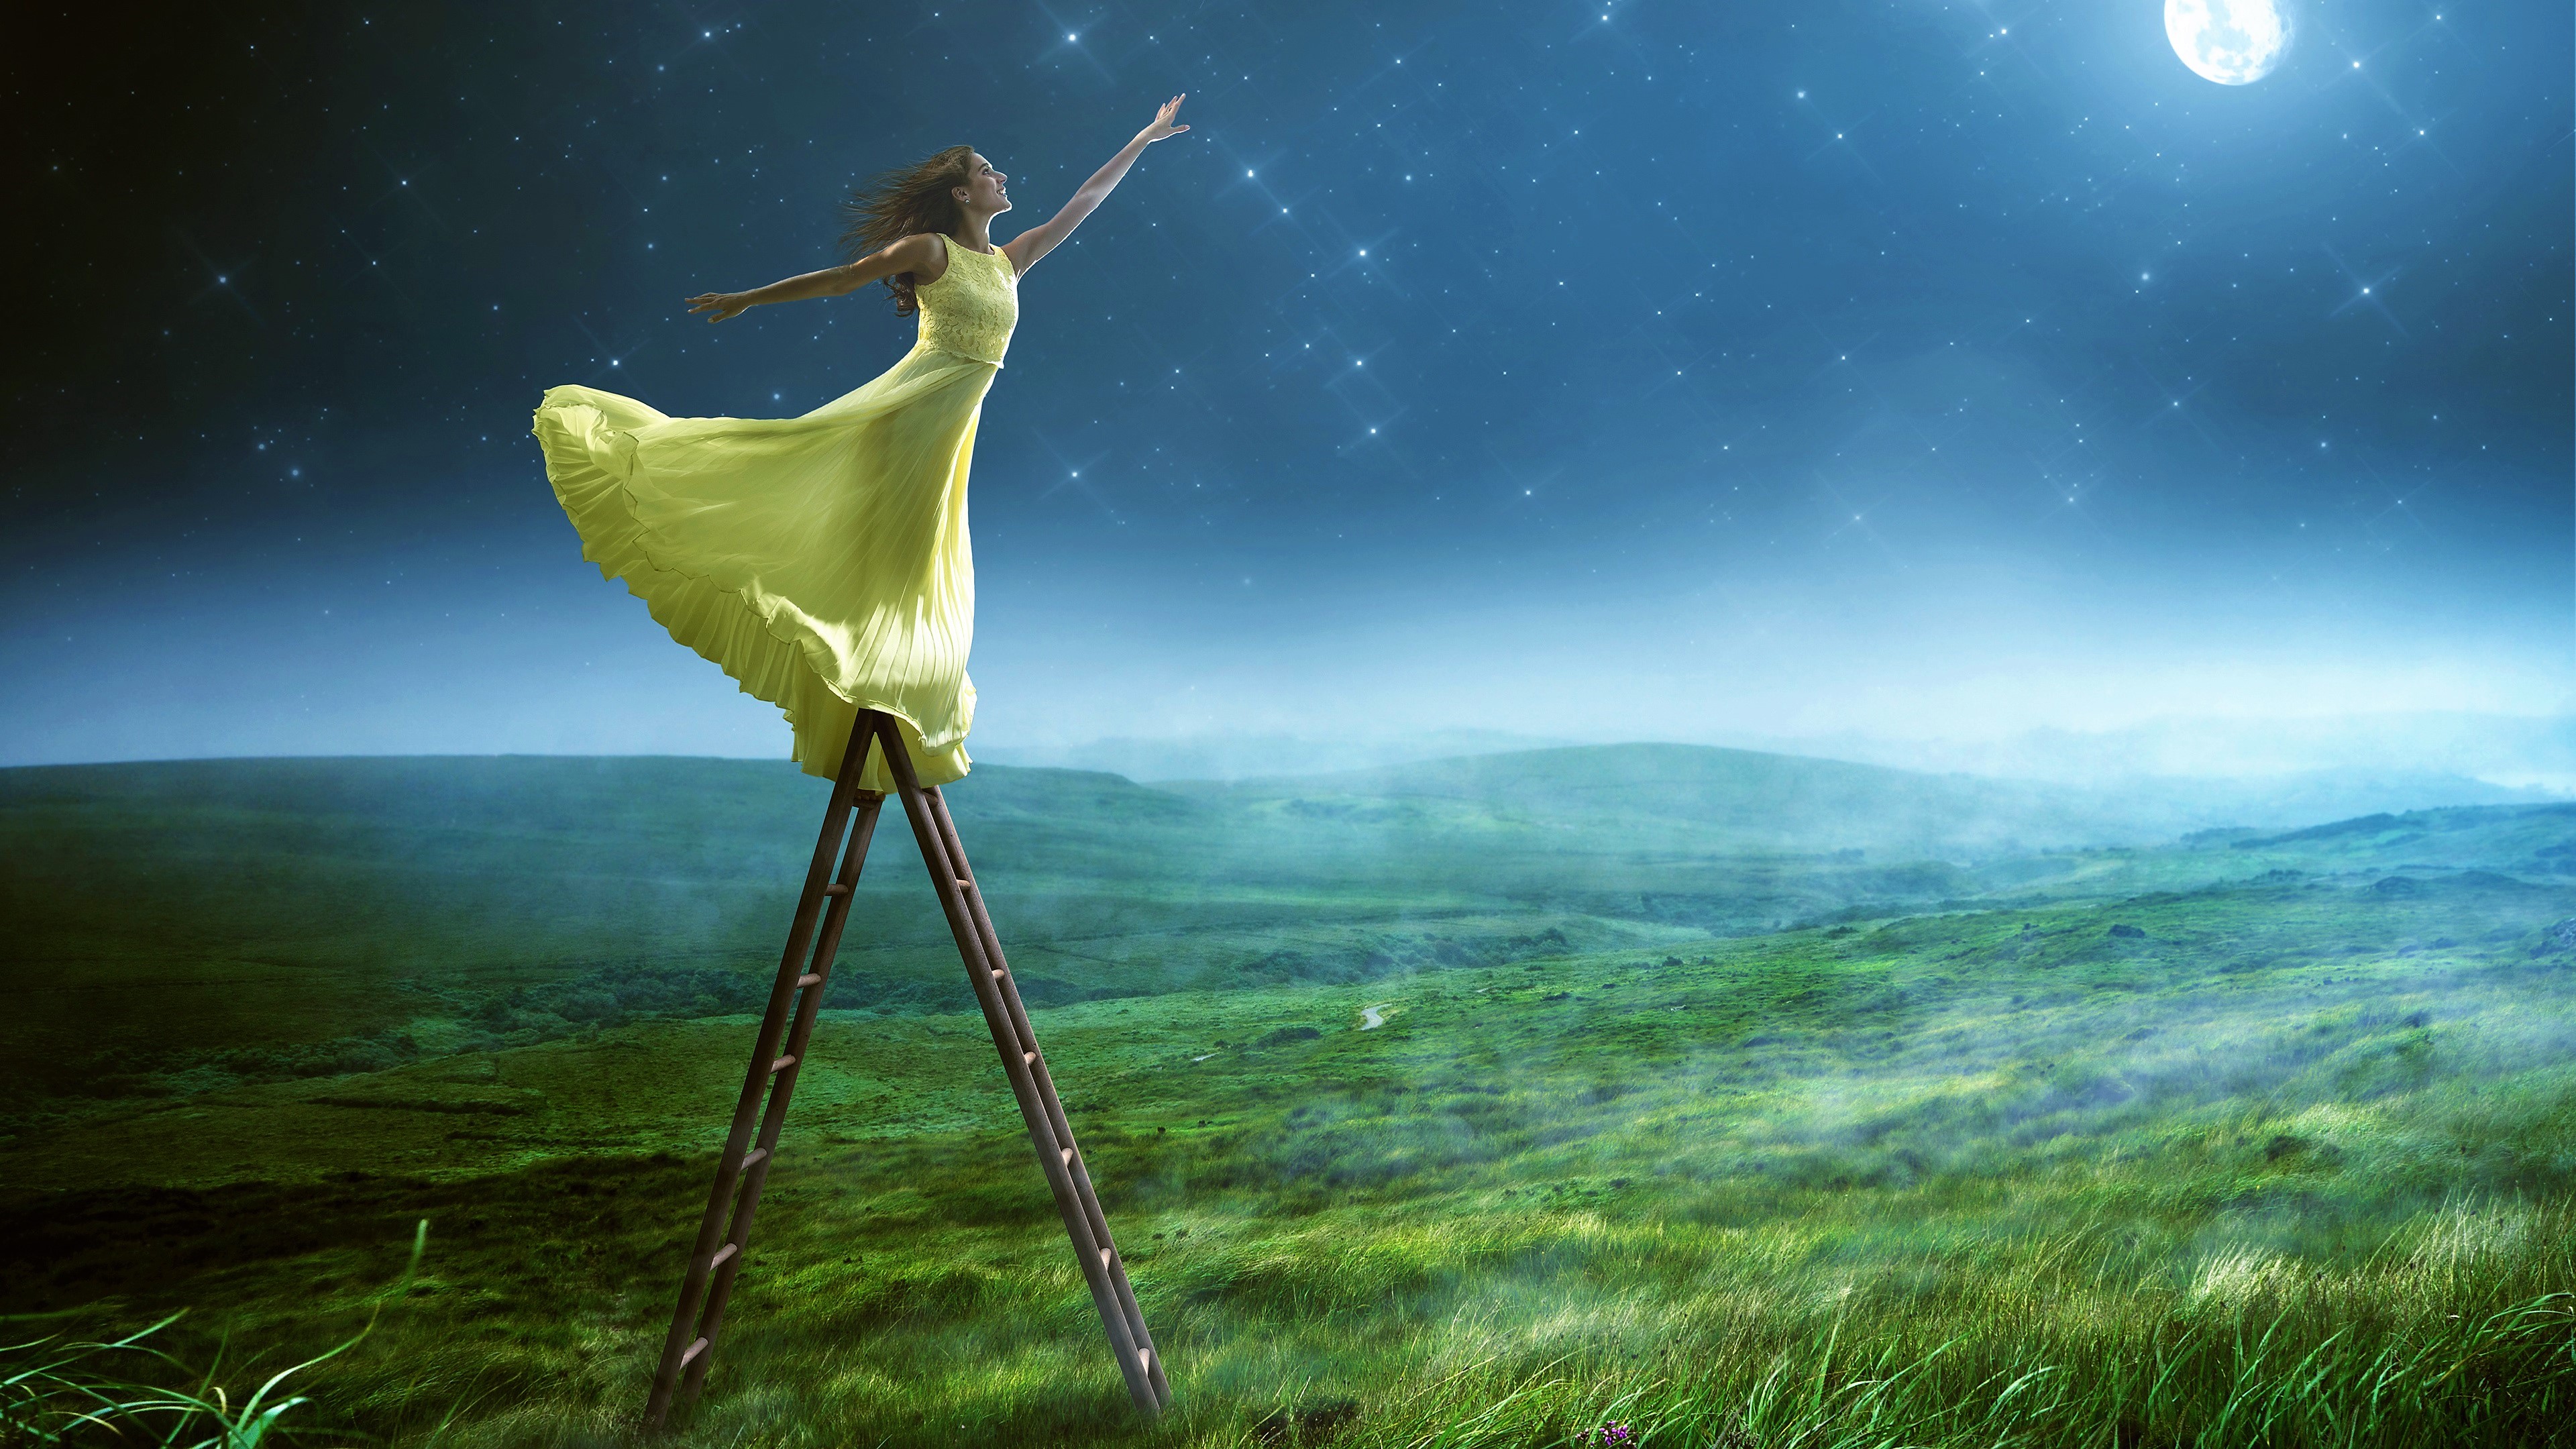 grass, artistic, fantasy, dress, ladder, moon for android